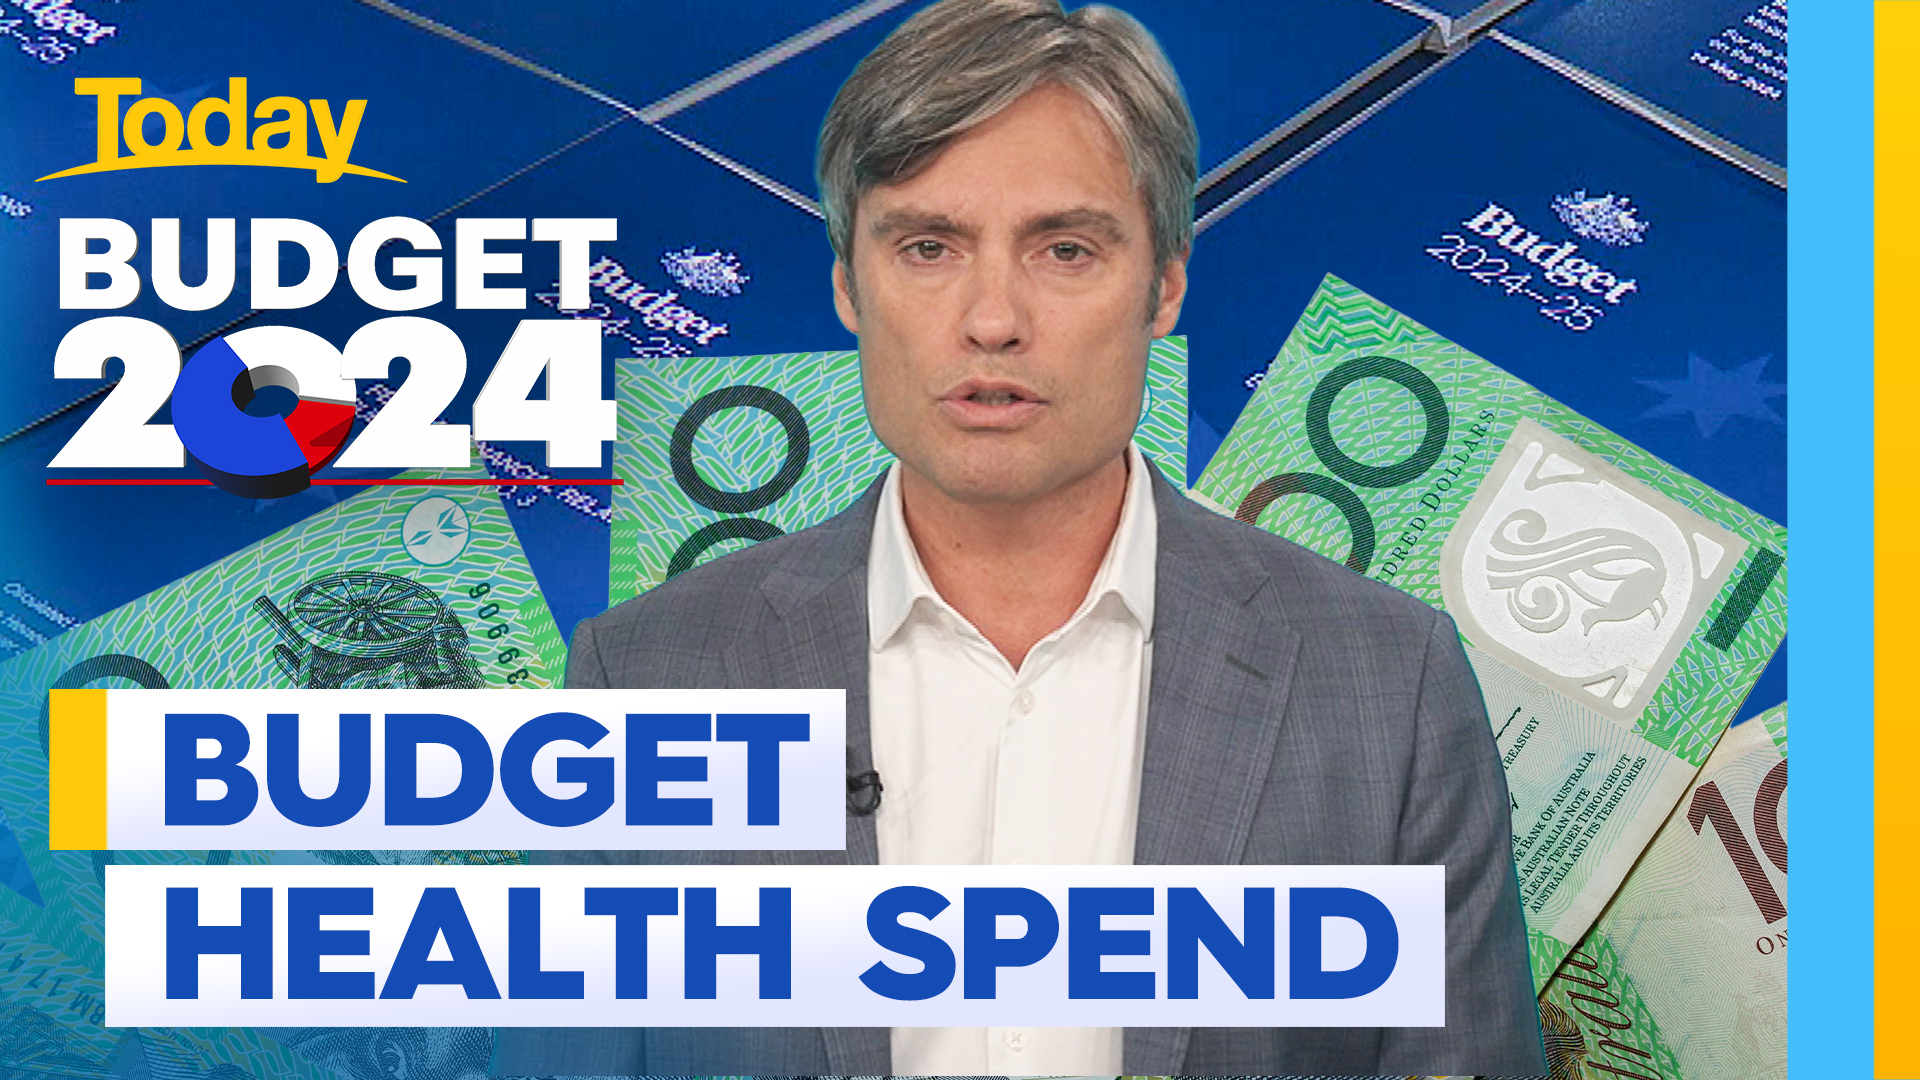 Does the Federal Budget do enough for health services?